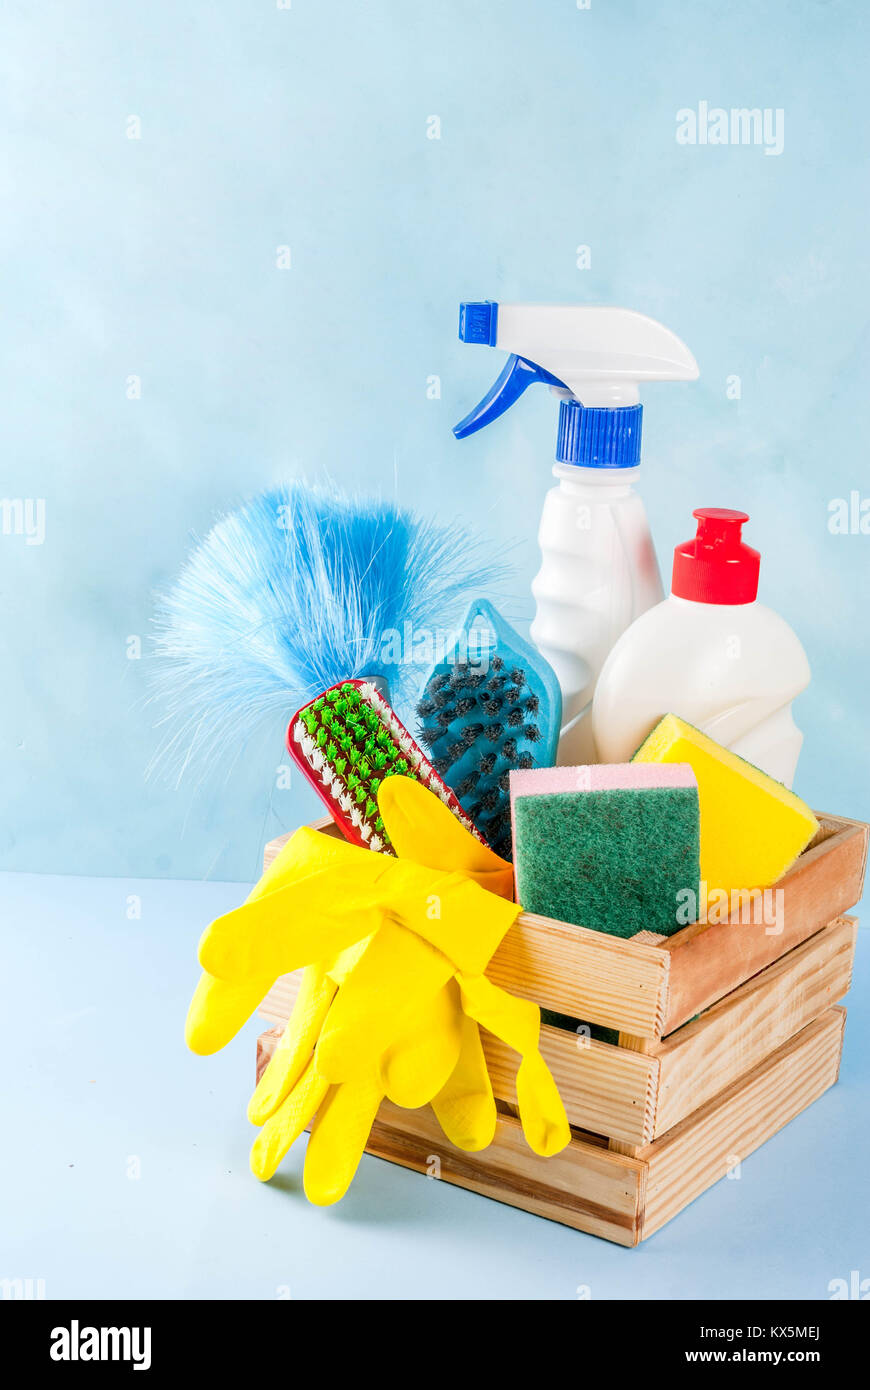 https://c8.alamy.com/comp/KX5MEJ/spring-cleaning-concept-with-supplies-house-cleaning-products-pile-KX5MEJ.jpg